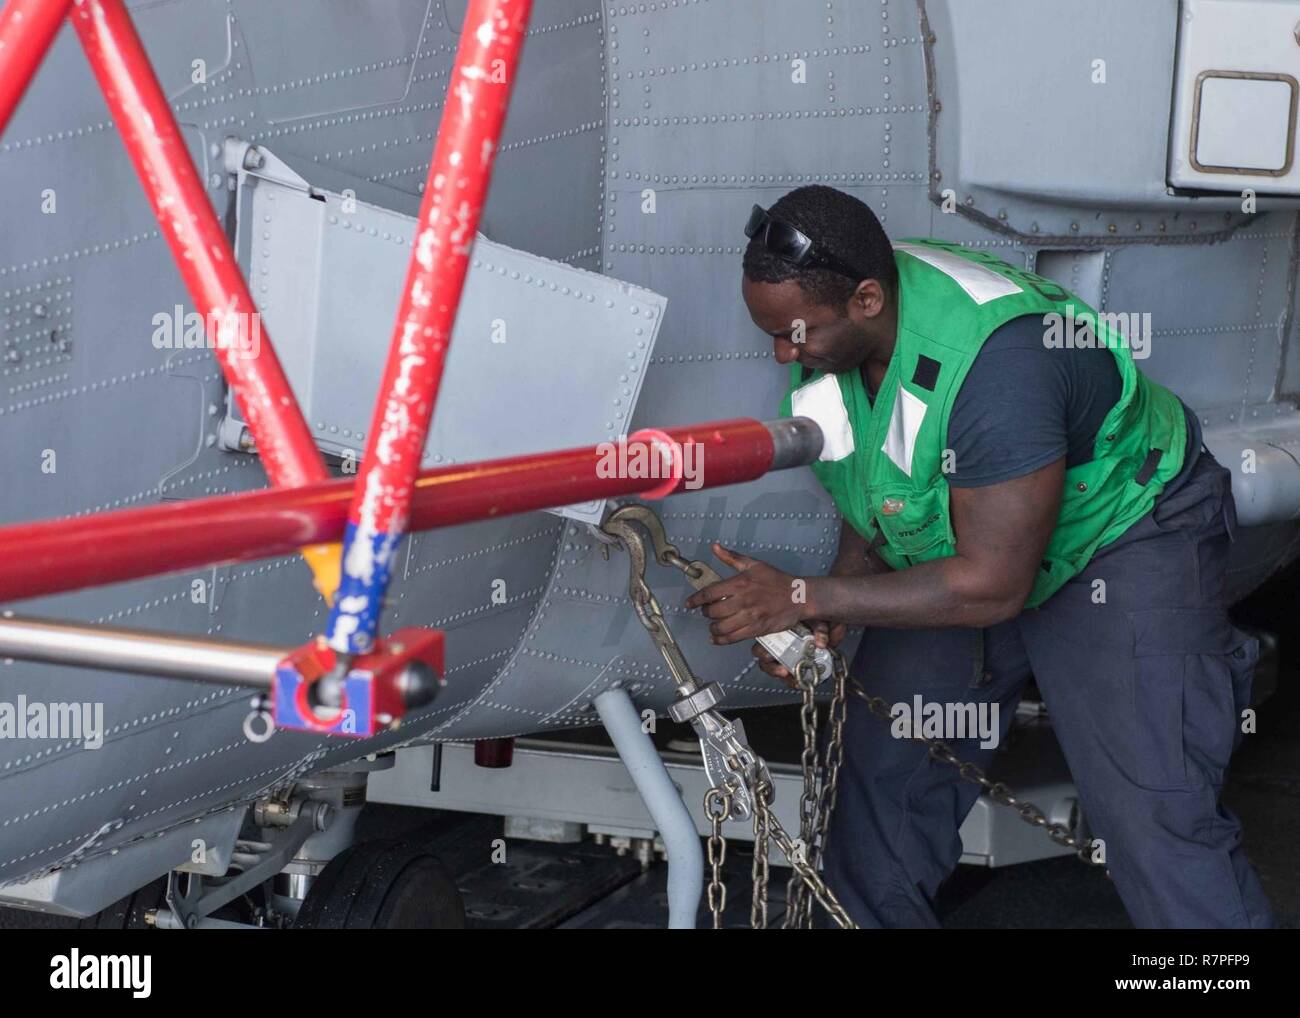 PACIFIC OCEAN (March 23, 2017) Aviation Electronics Technician 3rd Class Melshi Miclisse, from Palm Bay, Fla., chains down an MH-60R Sea Hawk helicopter assigned to the 'Scorpions' of Helicopter Maritime Strike Squadron (HSM) 49 in the hangar bay aboard the Ticonderoga-class guided-missile cruiser USS Lake Erie (CG 70) while underway conducting a composite training unit exercise (COMPTUEX) with the Nimitz Carrier Strike Group in preparation for an upcoming deployment. COMPTUEX tests the mission-readiness of the strike group's assets through simulated real-world scenarios and their ability to p Stock Photo